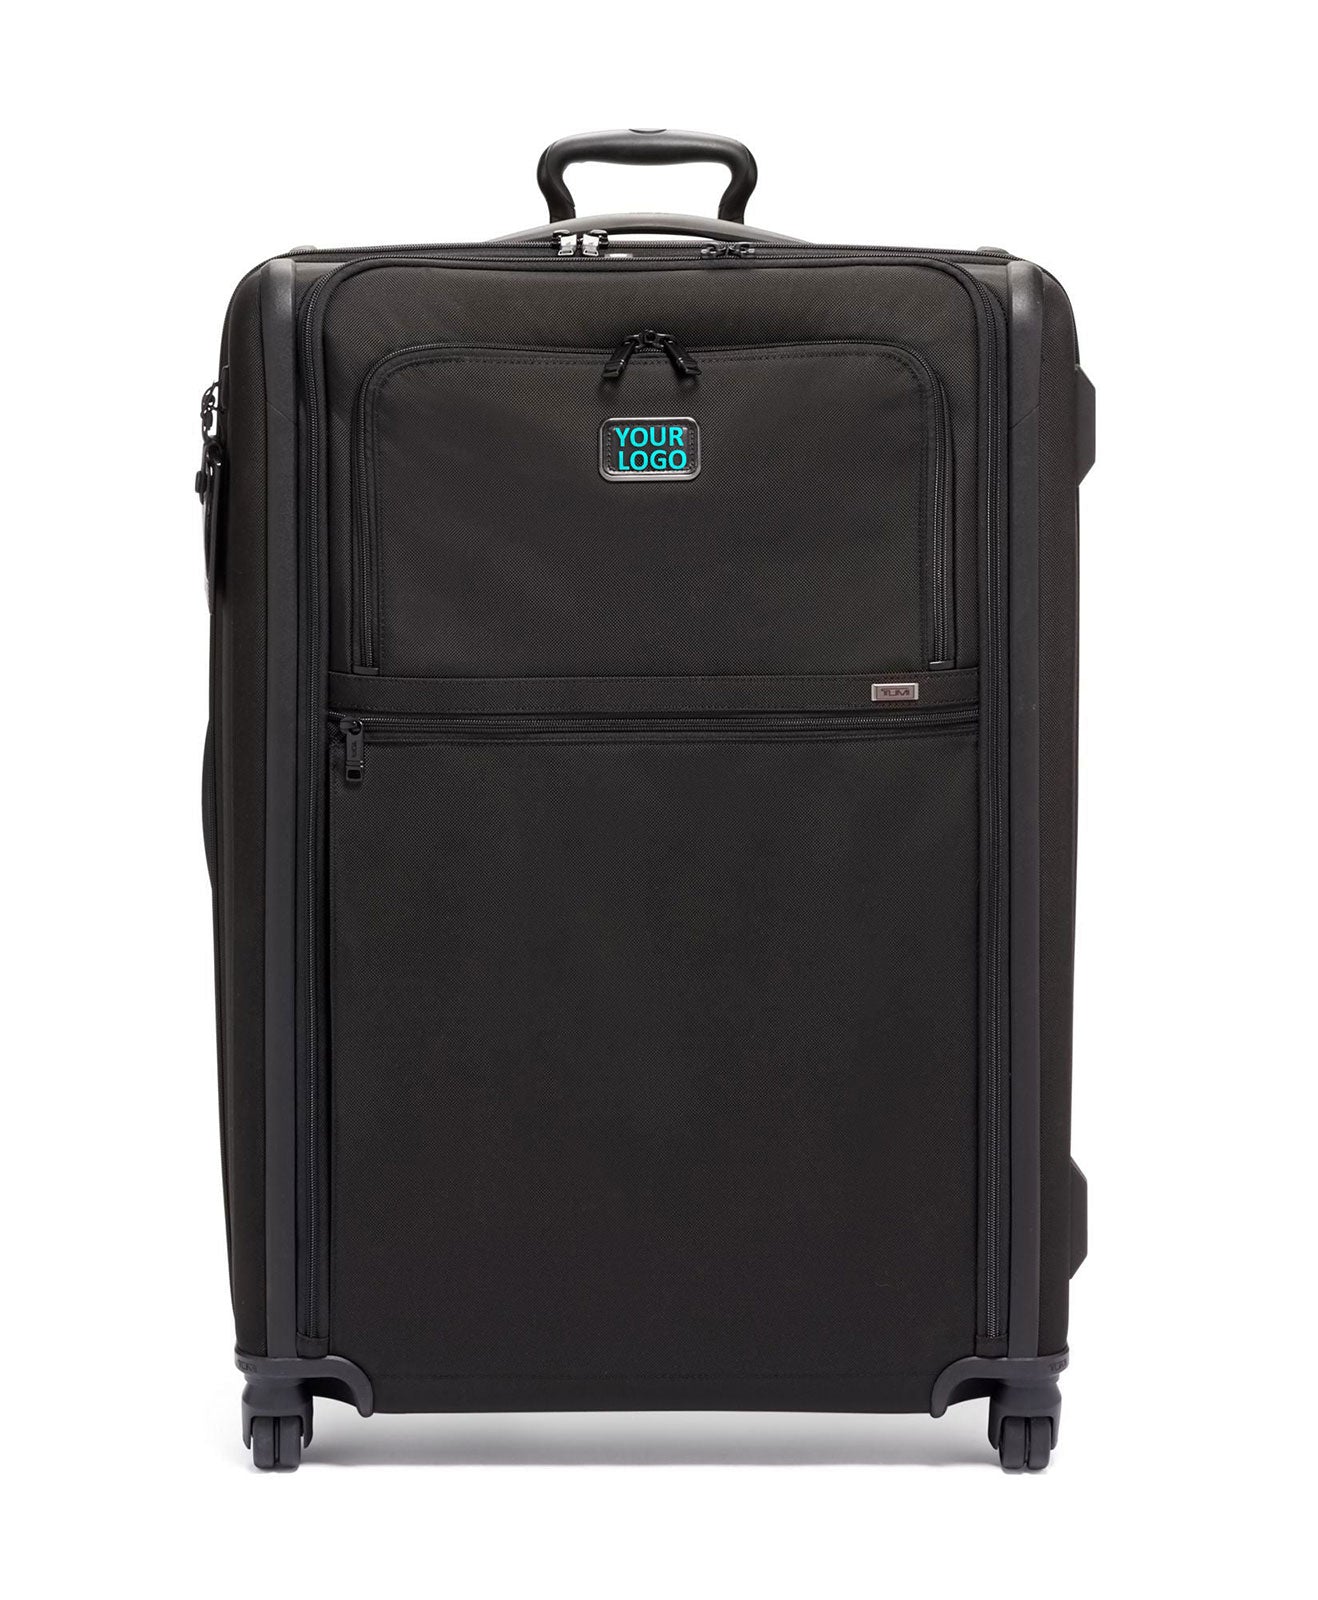 Tumi Extended Trip Expandable 4 Wheeled Packing Case Black 1171671041